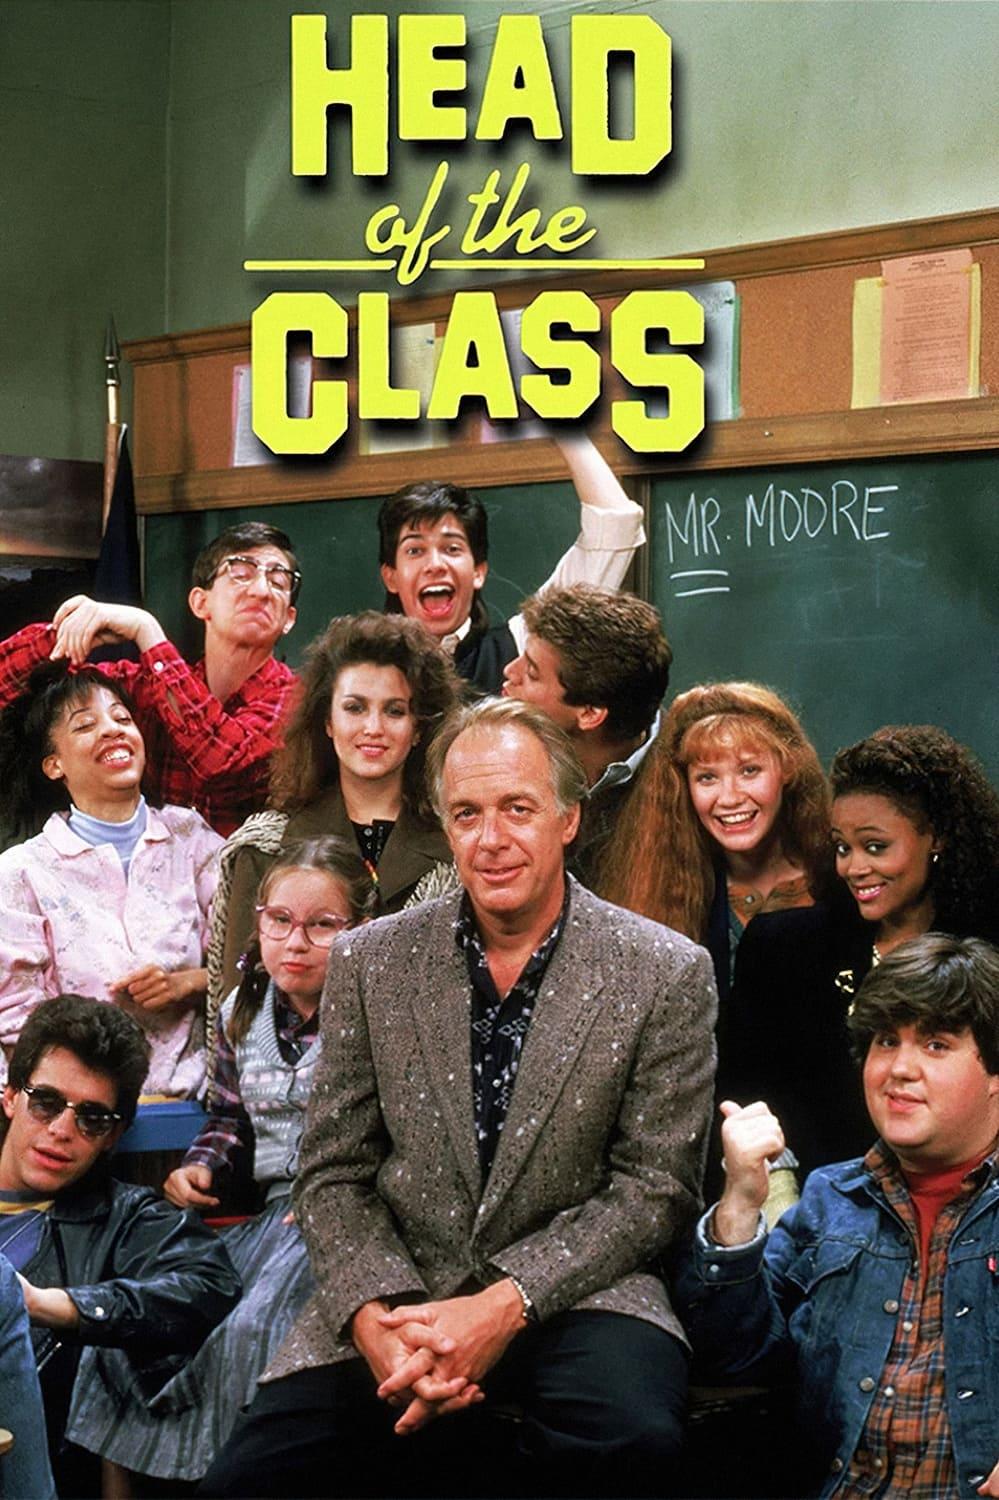 Head of the Class poster